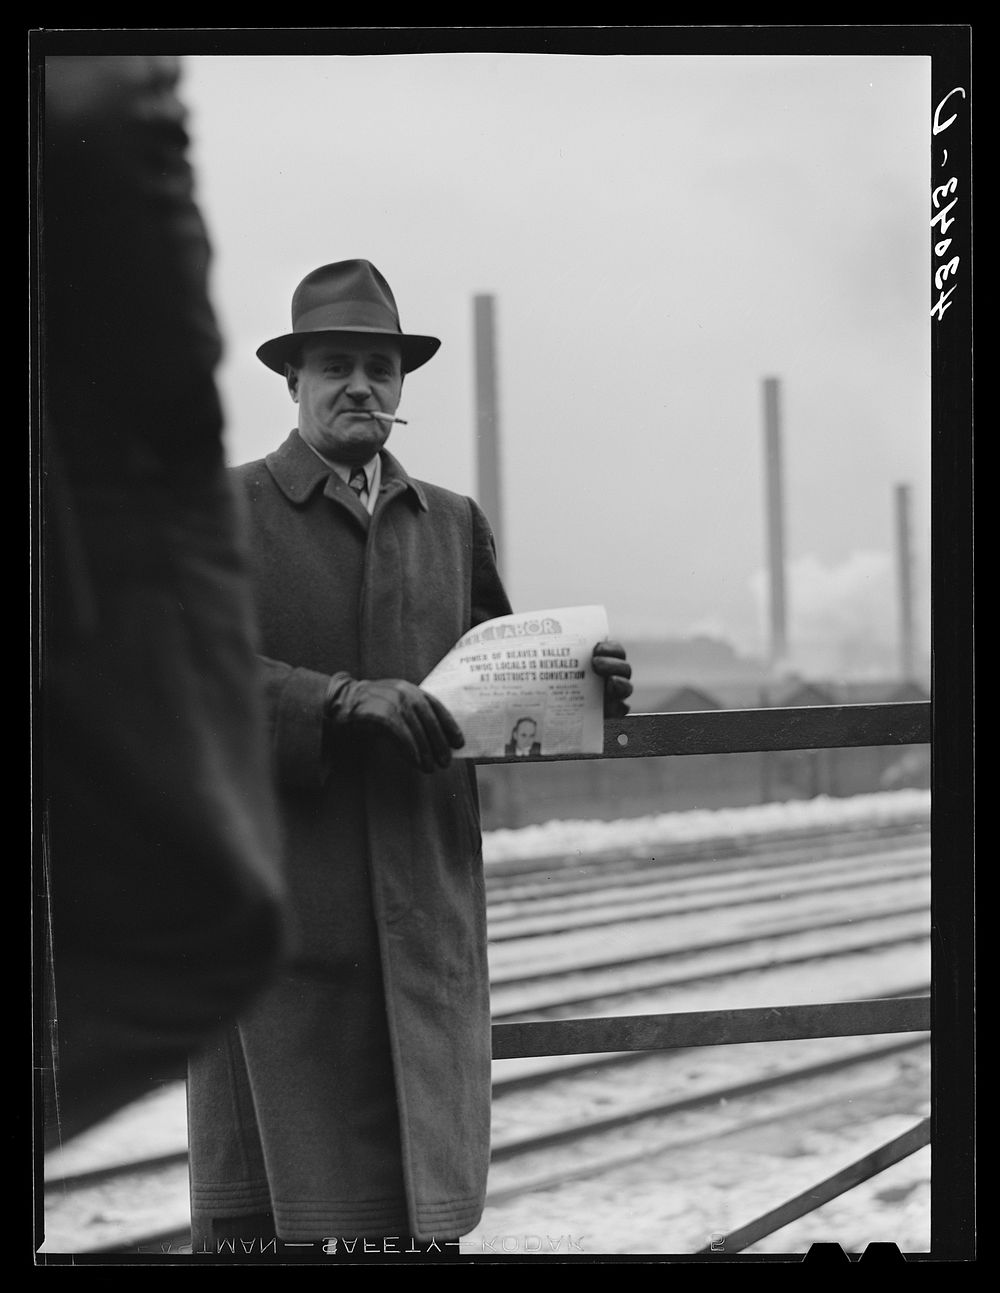 [Untitled photo, possibly related to: Union member distributing "Steel Labor" near the entrance the the Jones and Laughlin…